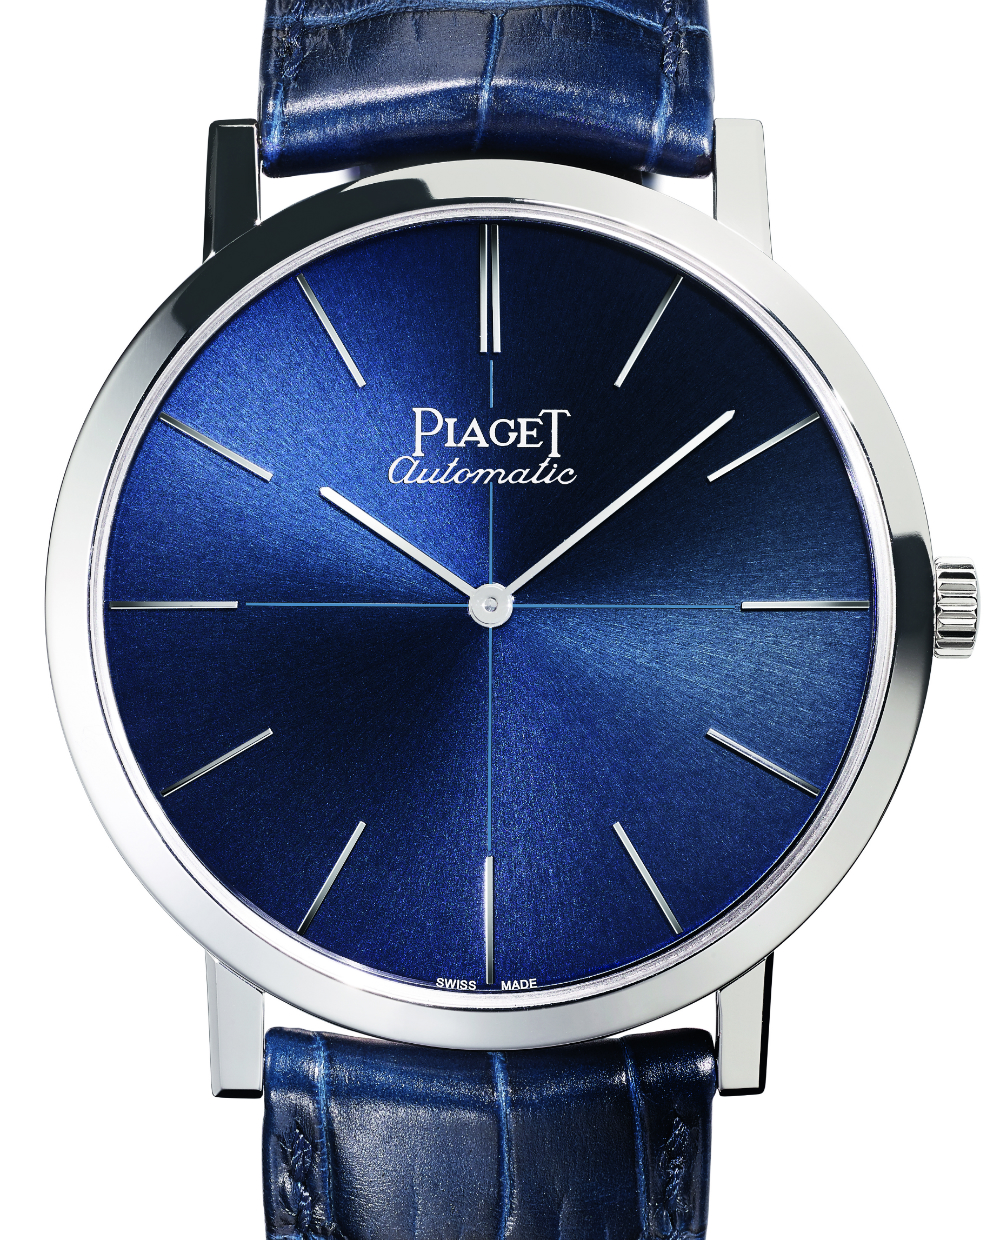 Piaget Altiplano 60th Anniversary Watches In An Automatic 43mm & Manual-Wind 38mm Watch Releases 